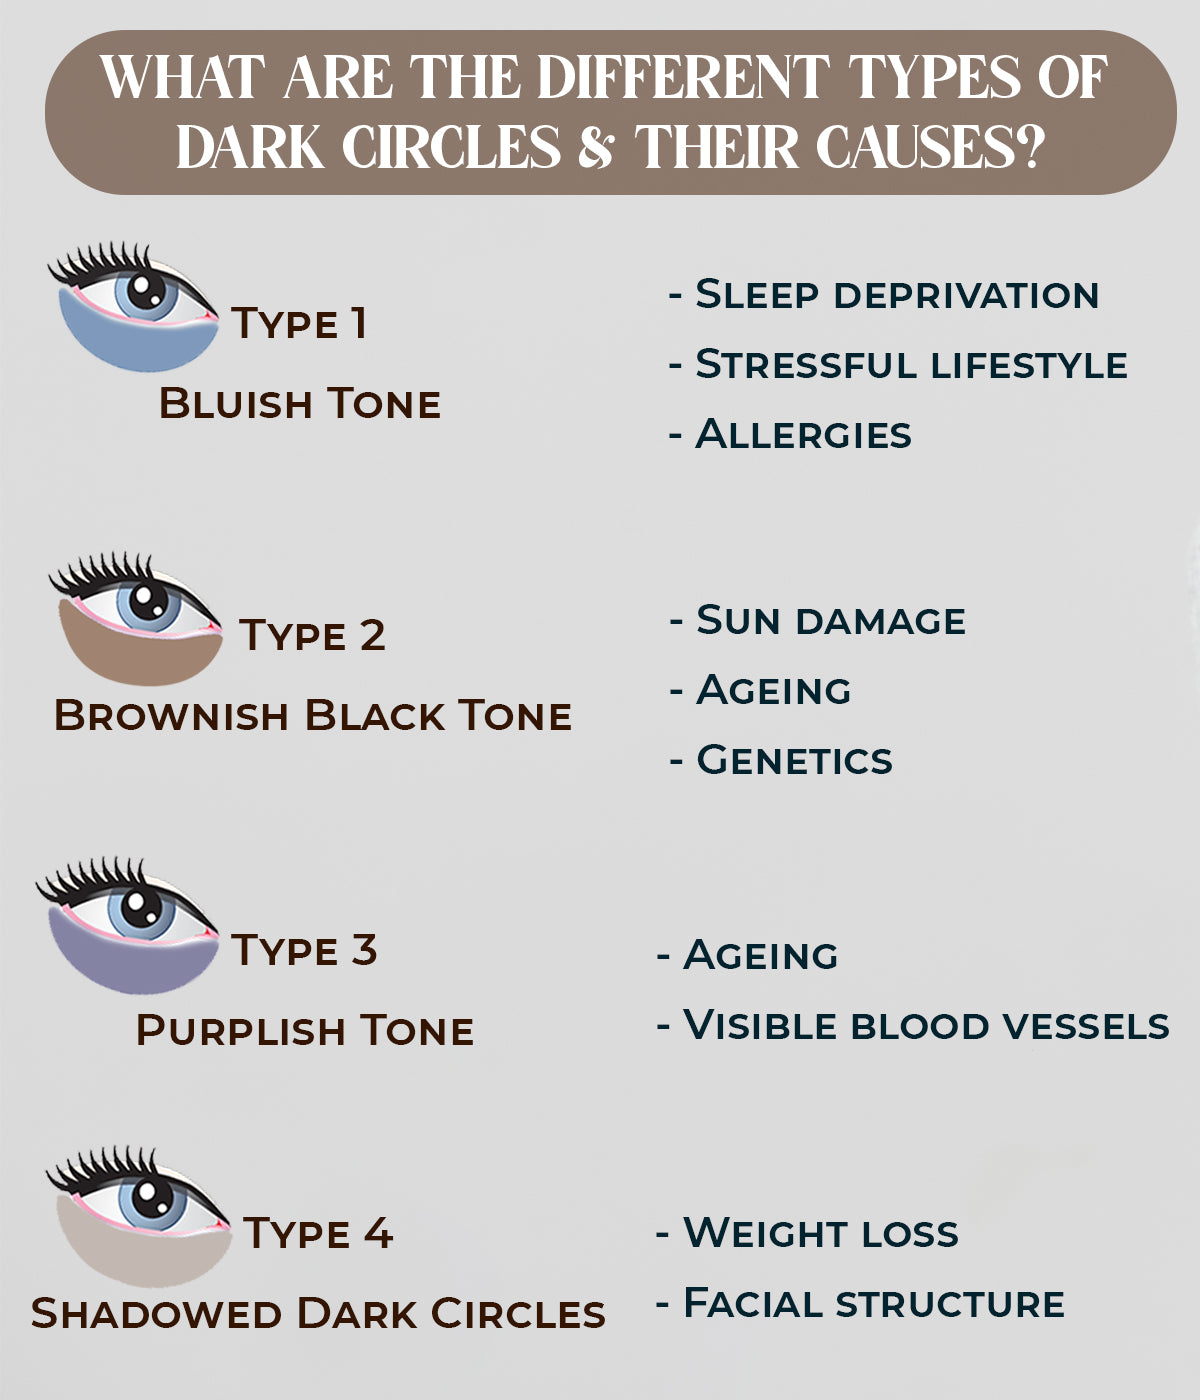 50 shades of dark circles and how to manage them!